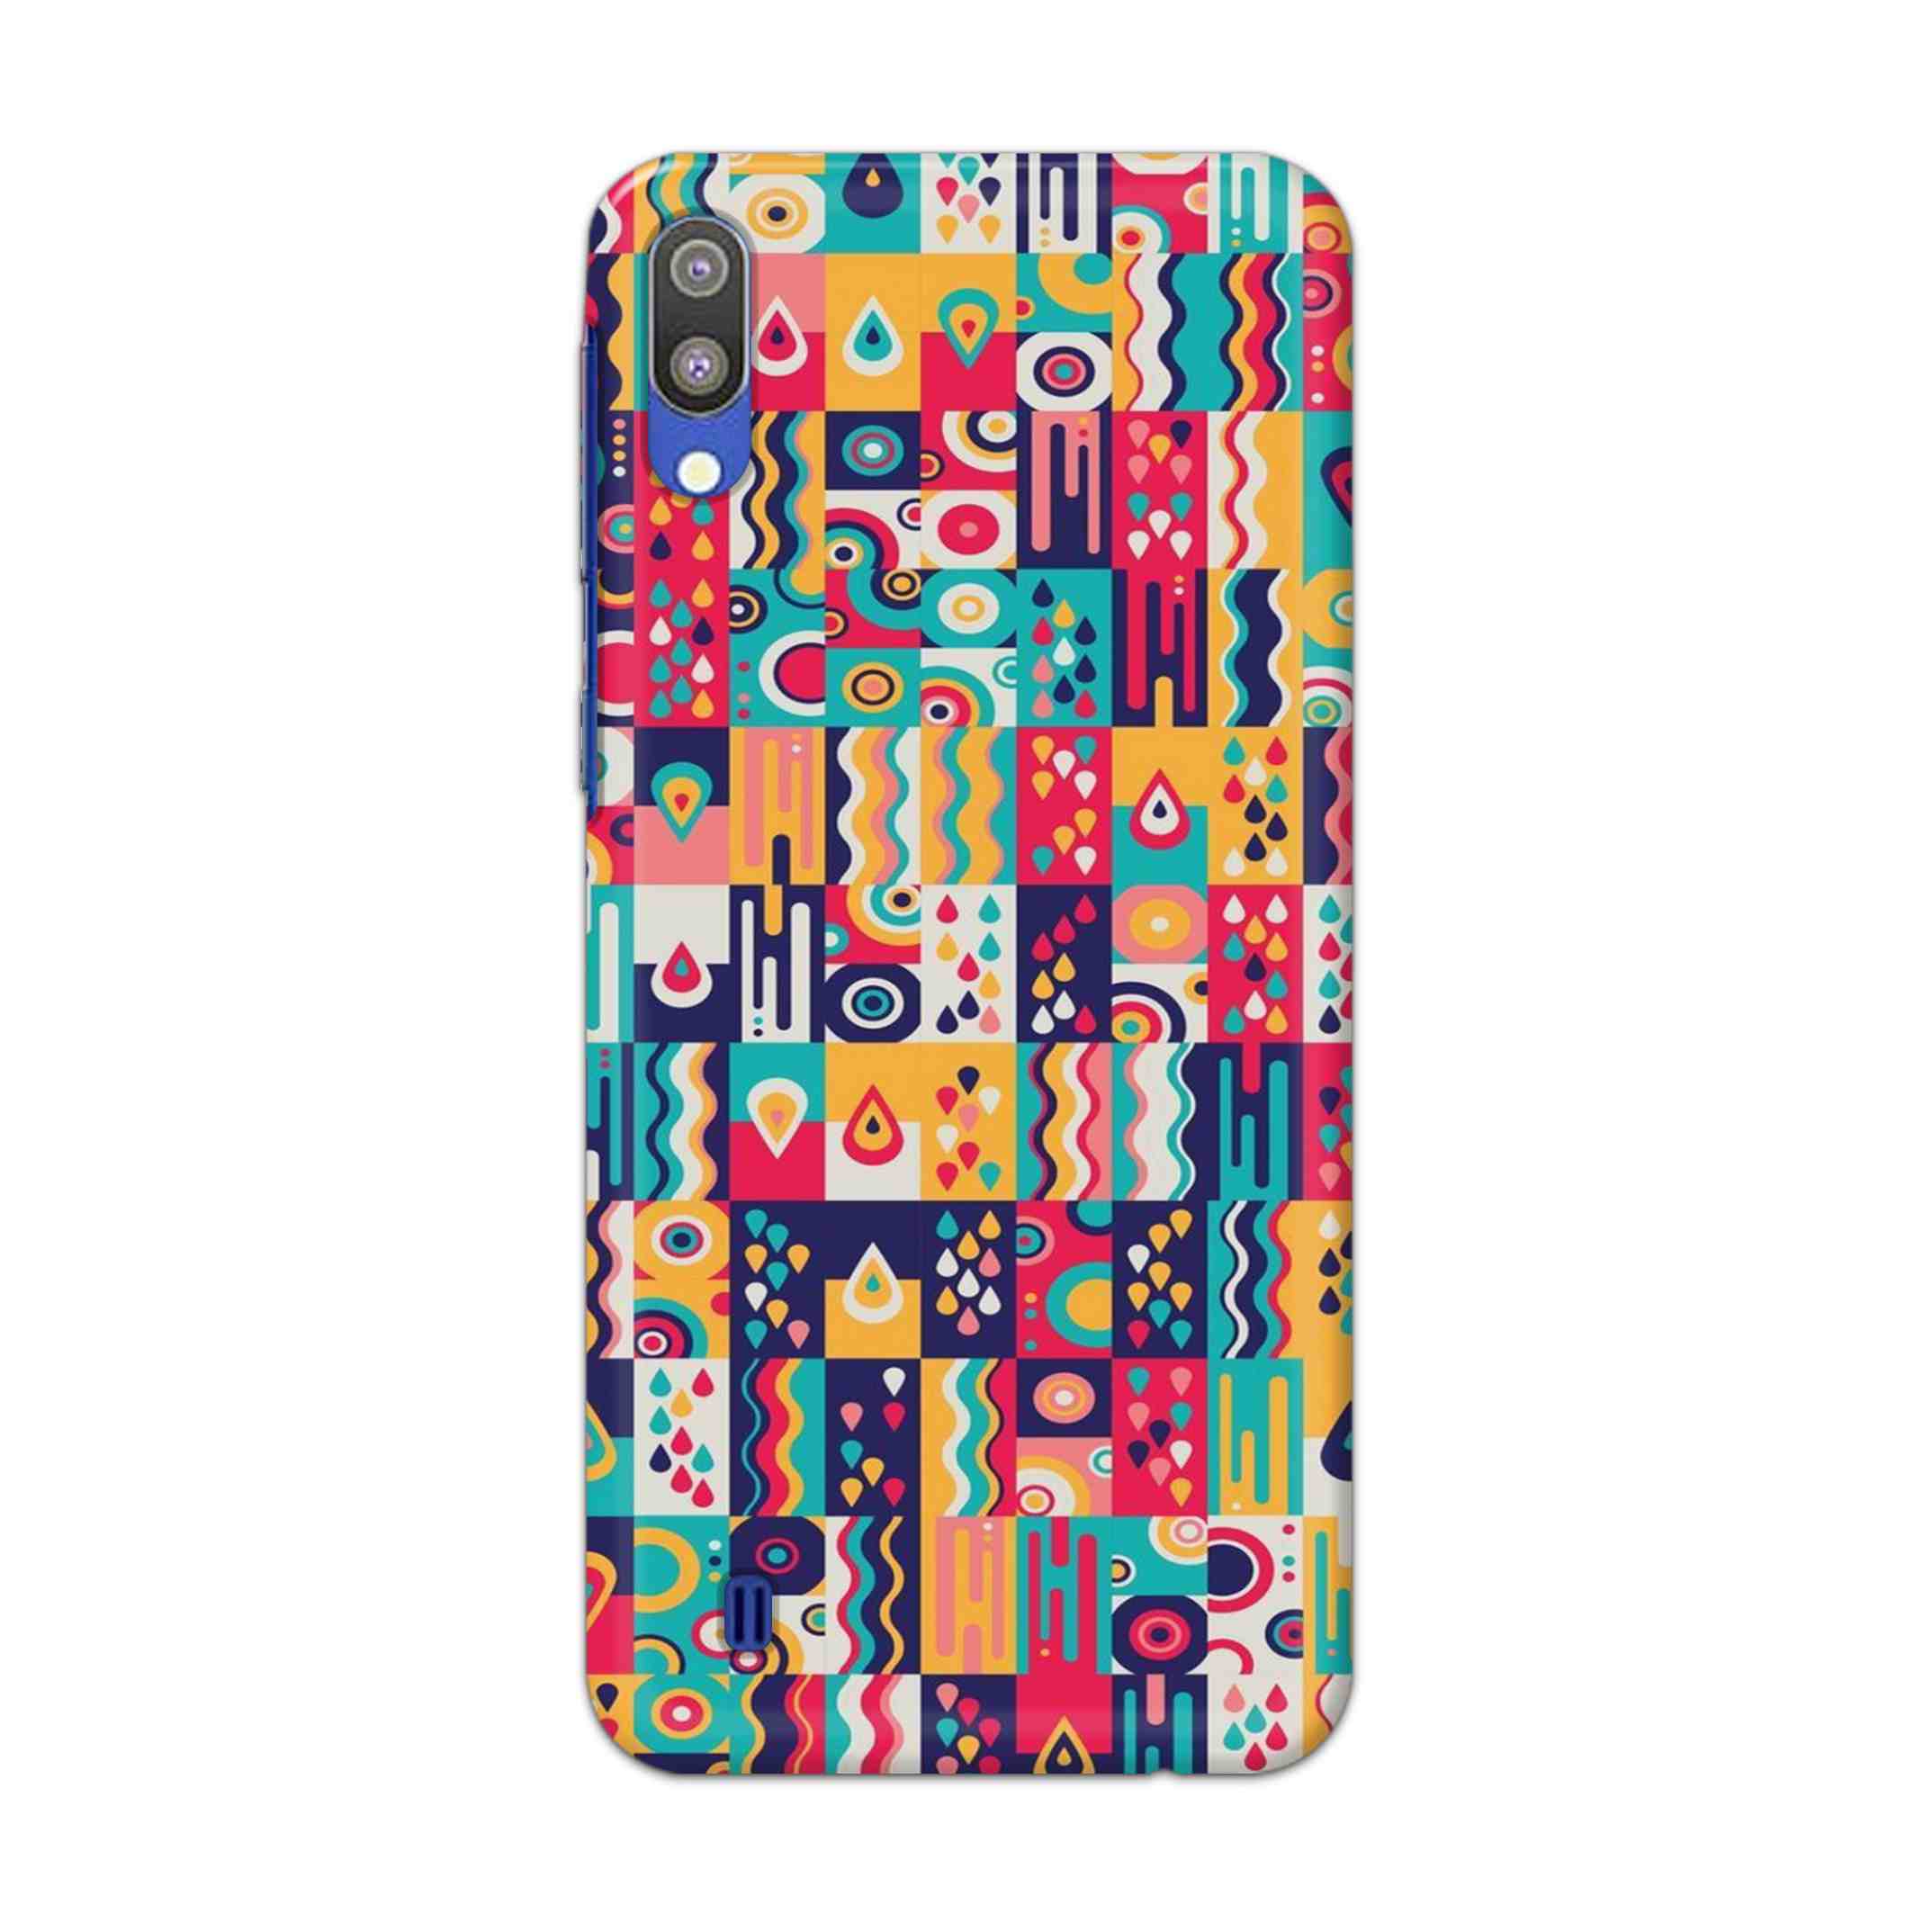 Buy Art Hard Back Mobile Phone Case Cover For Samsung Galaxy M10 Online